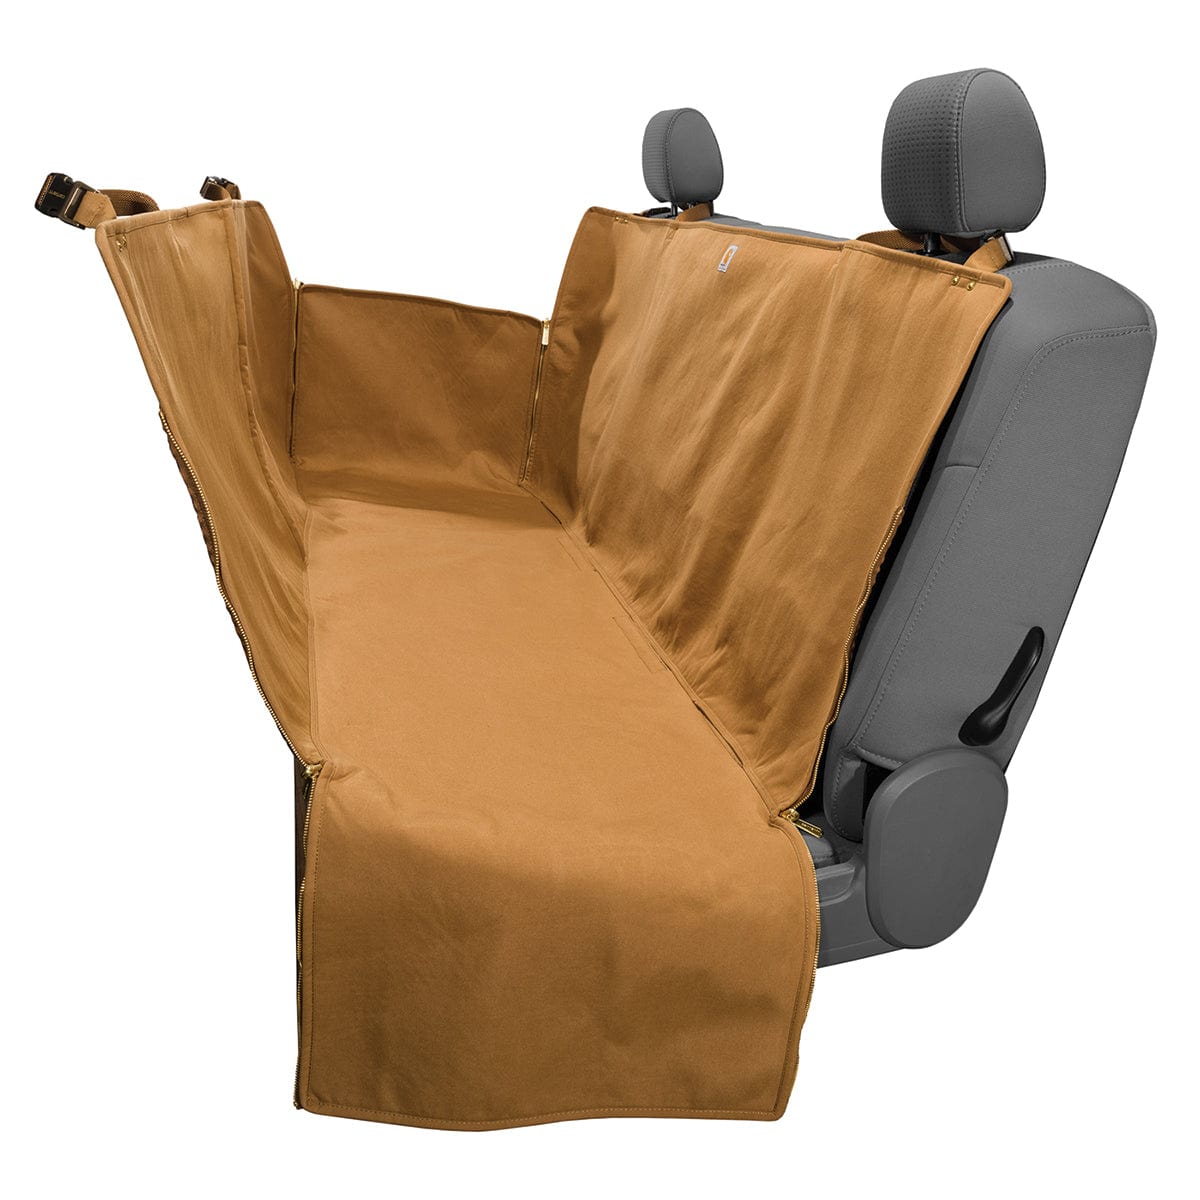 Universal Pet Seat Covers